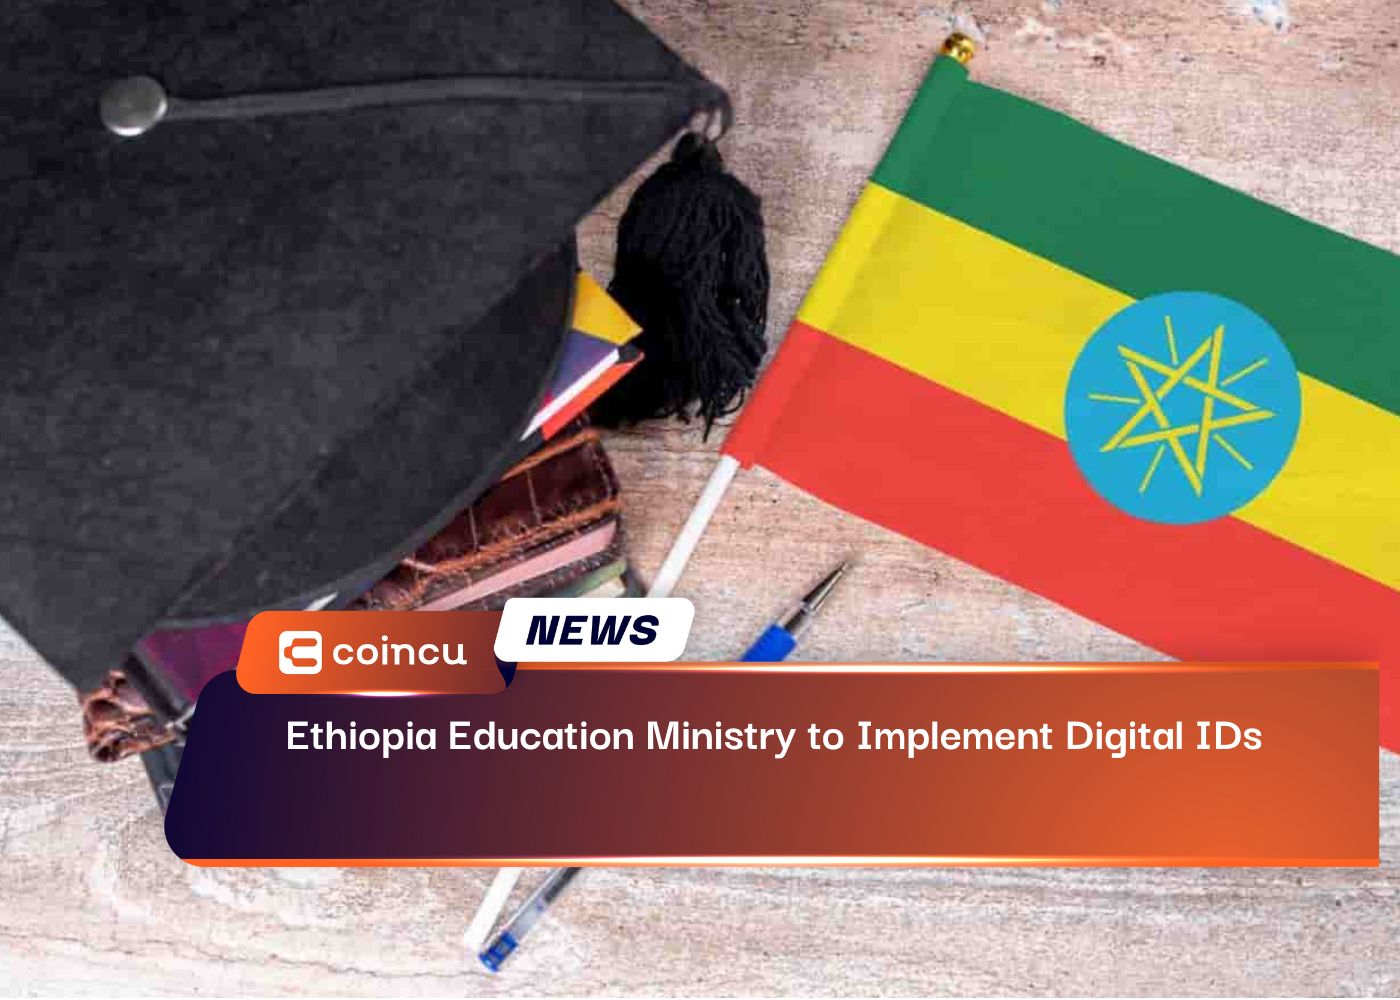 Ethiopia Education Ministry to Implement Digital School IDs